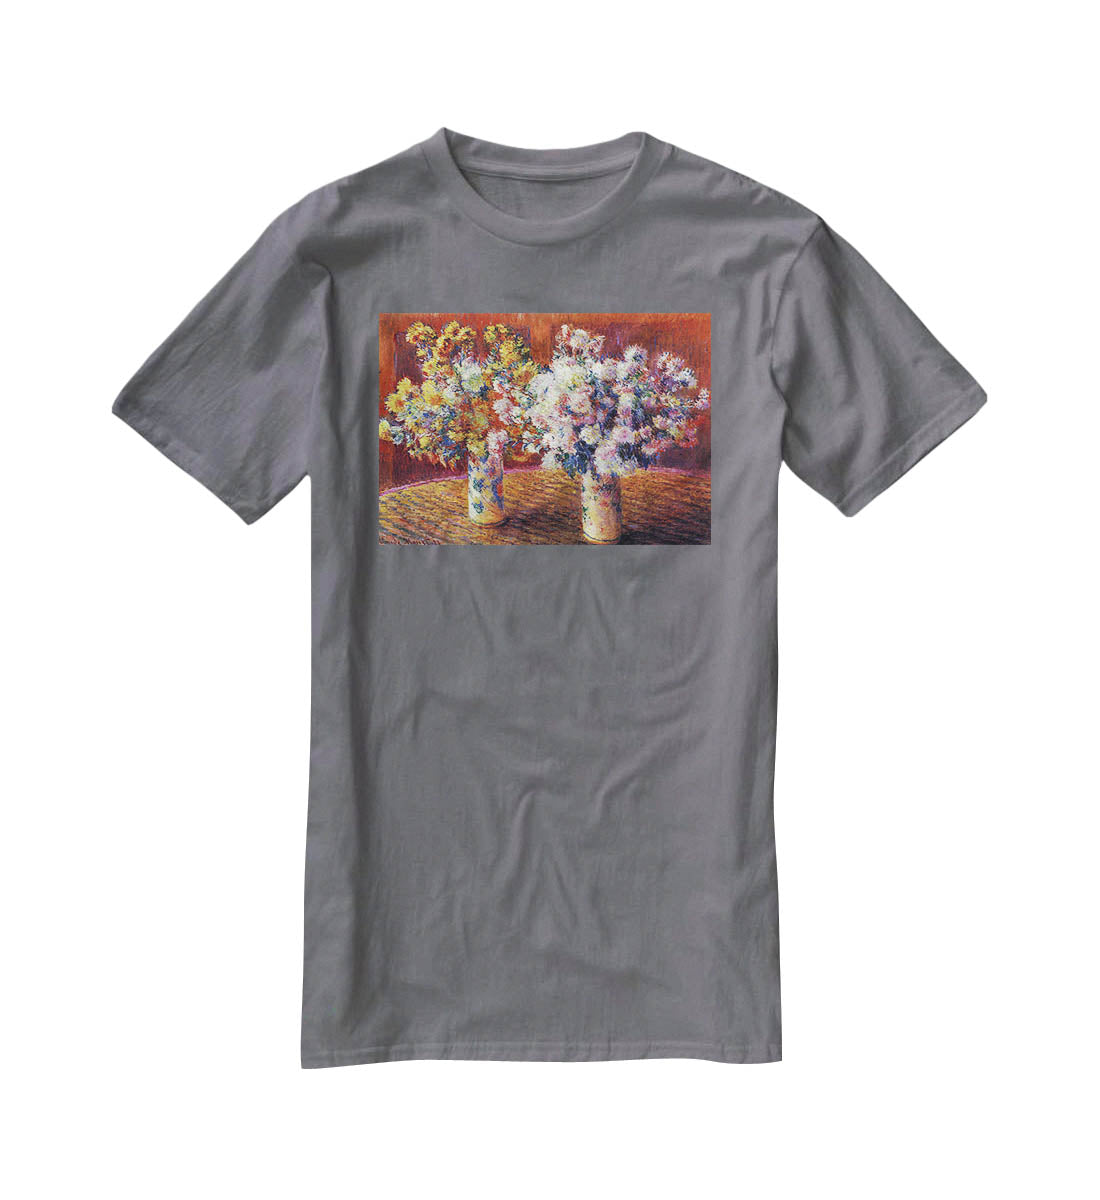 Two vases with Chrysanthemums by Monet T-Shirt - Canvas Art Rocks - 3